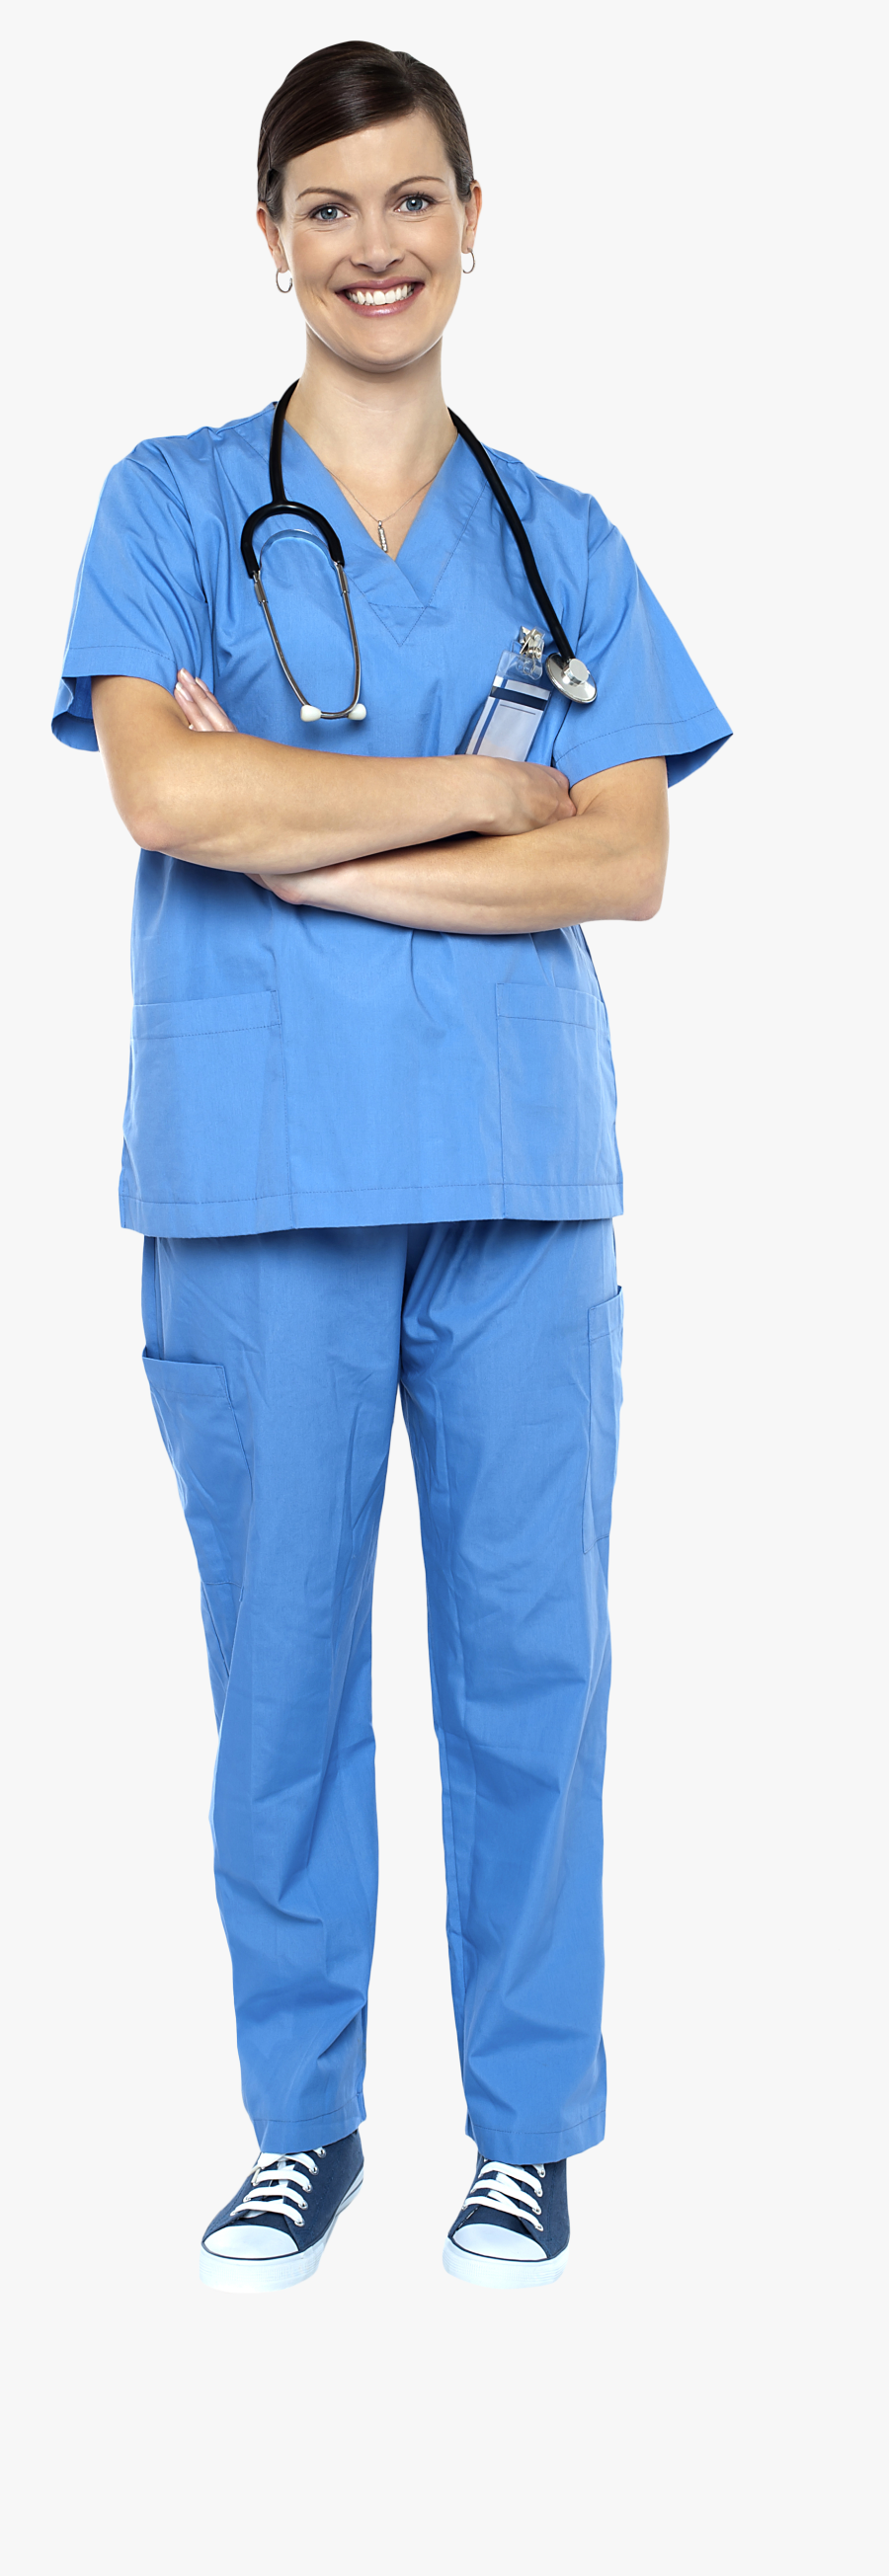 Female Doctor Png Image, Transparent Clipart